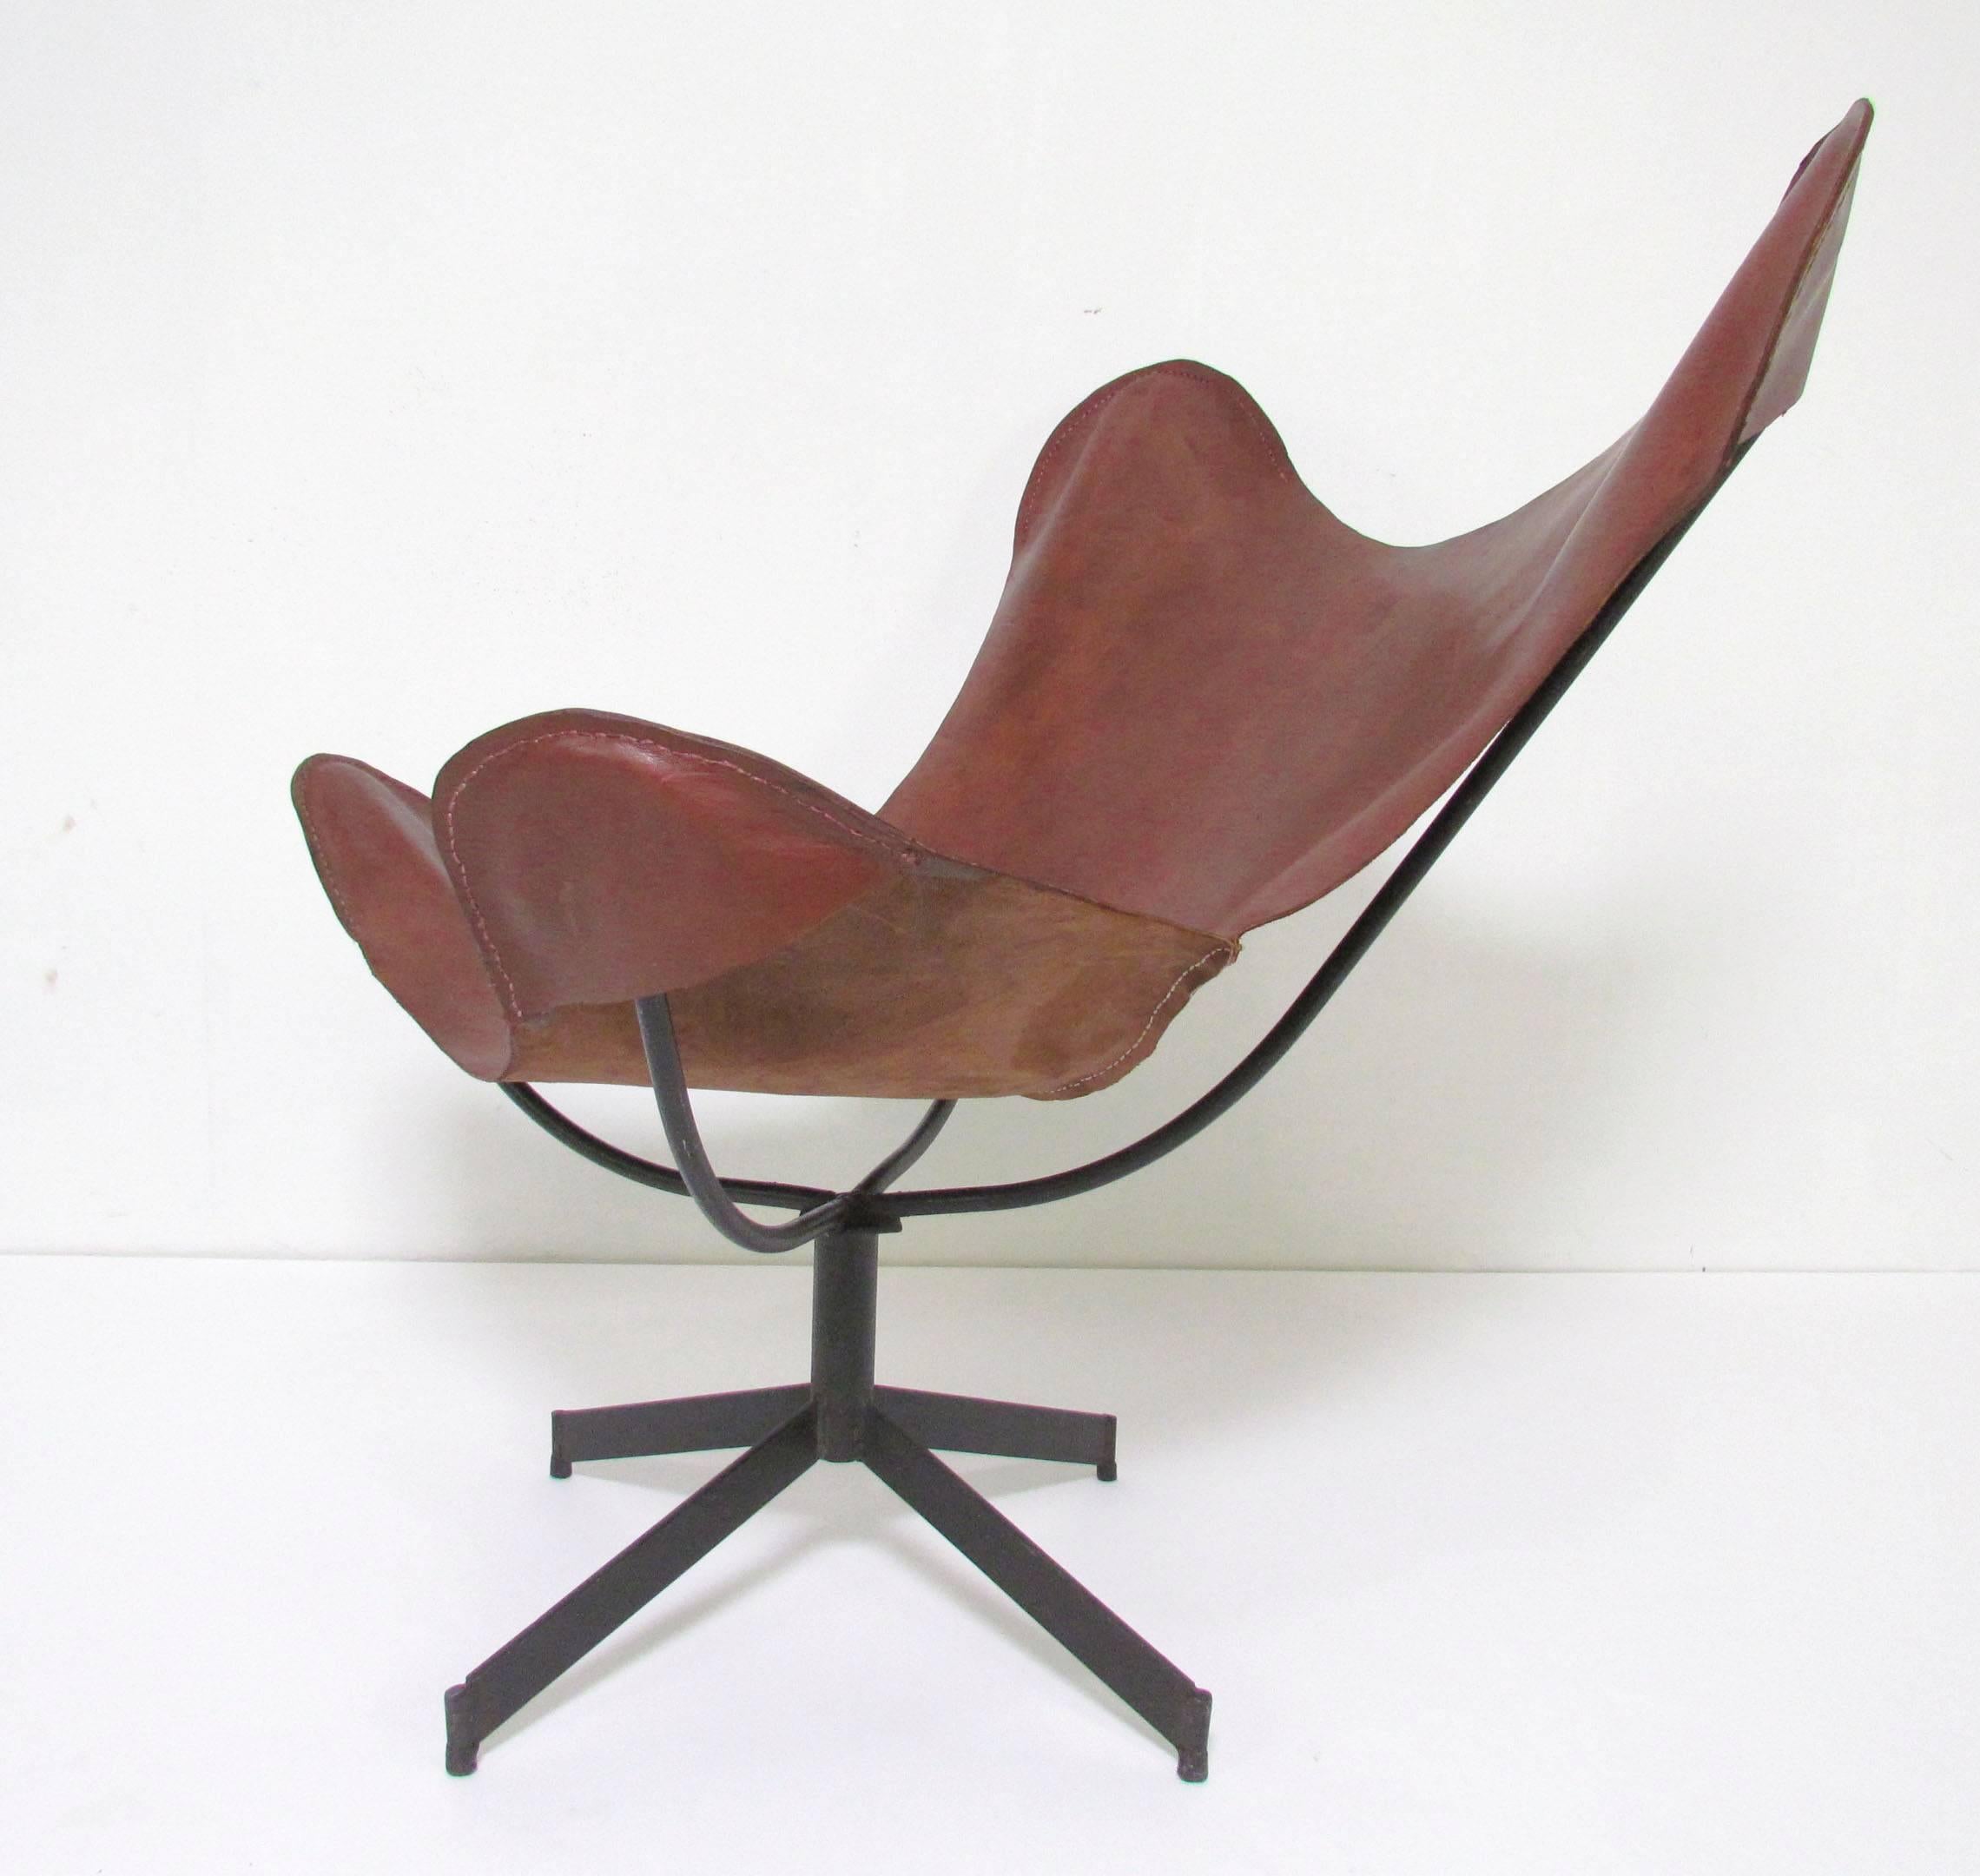 American Swivel Leather Sling Lounge Chair by Leathercrafter, New York, circa 1960s